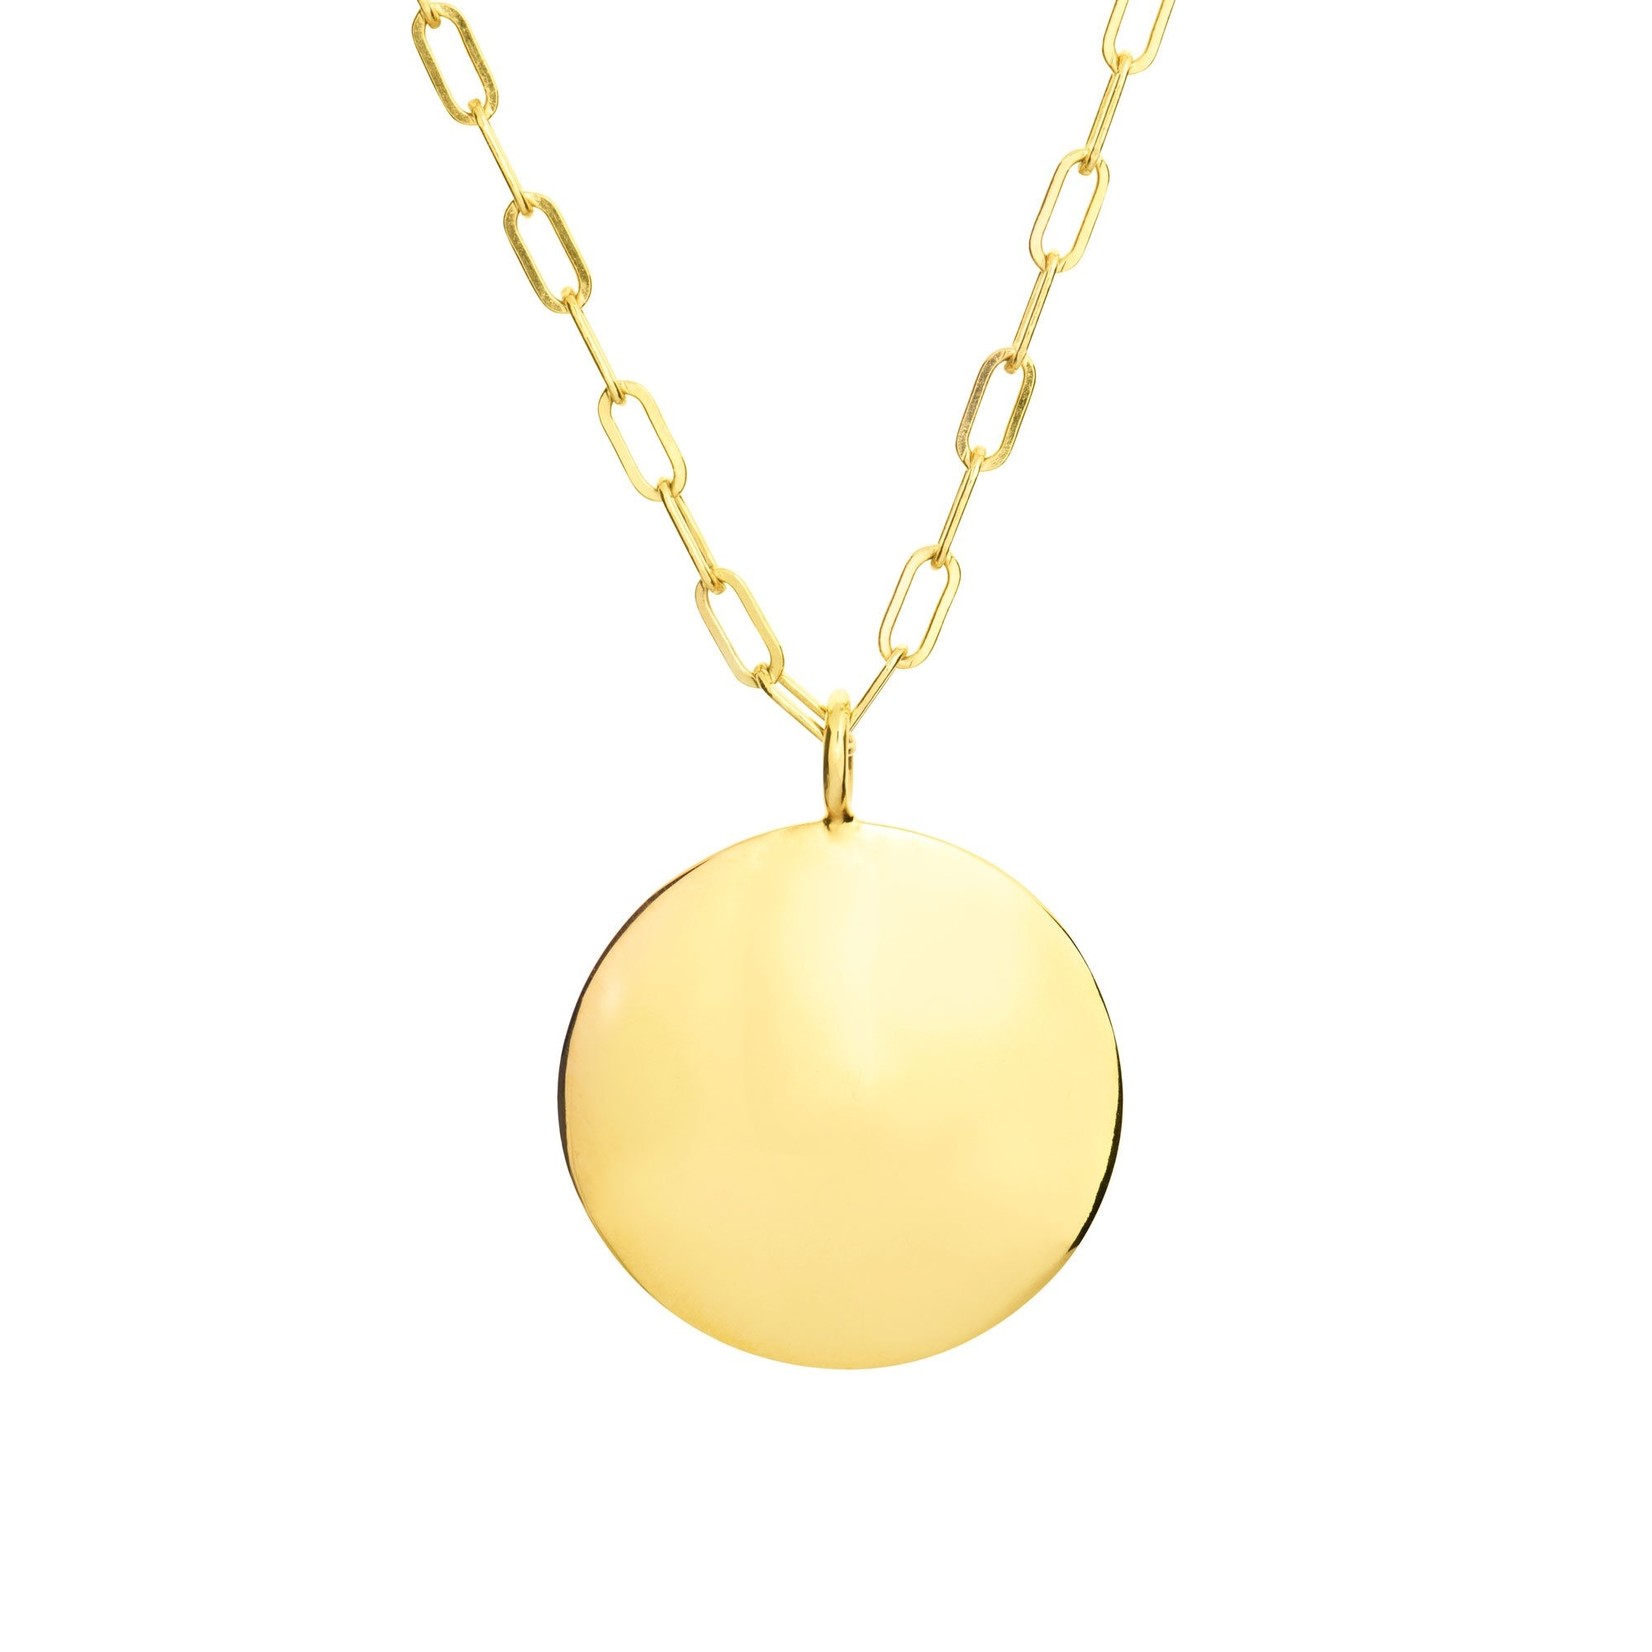 Lolo Jewellery Chloe Disc Necklace - Gold - 16"